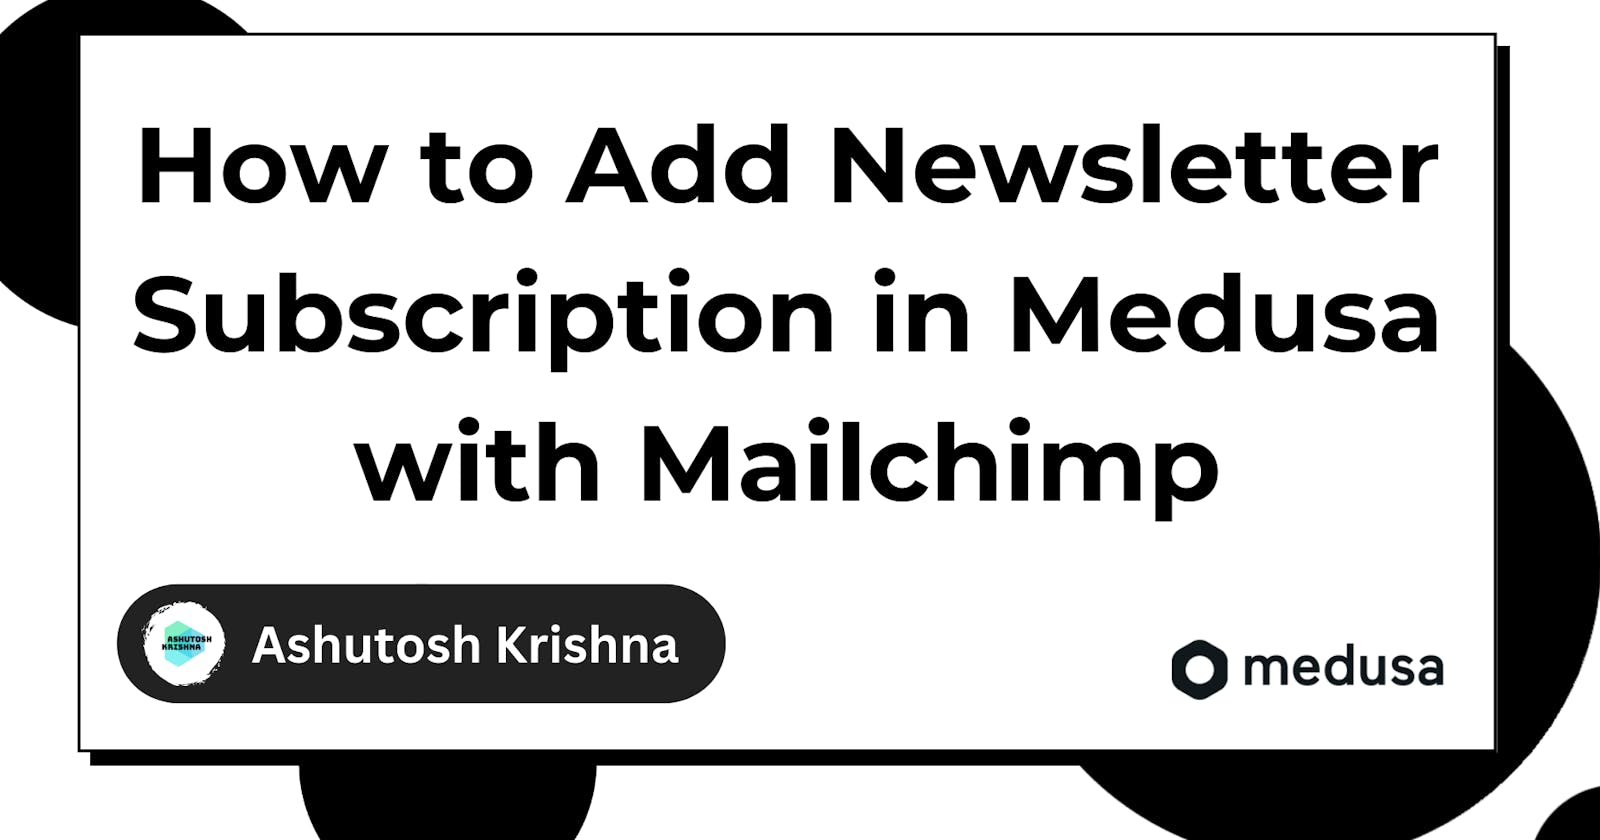 How to Add Newsletter Subscription in Medusa with Mailchimp